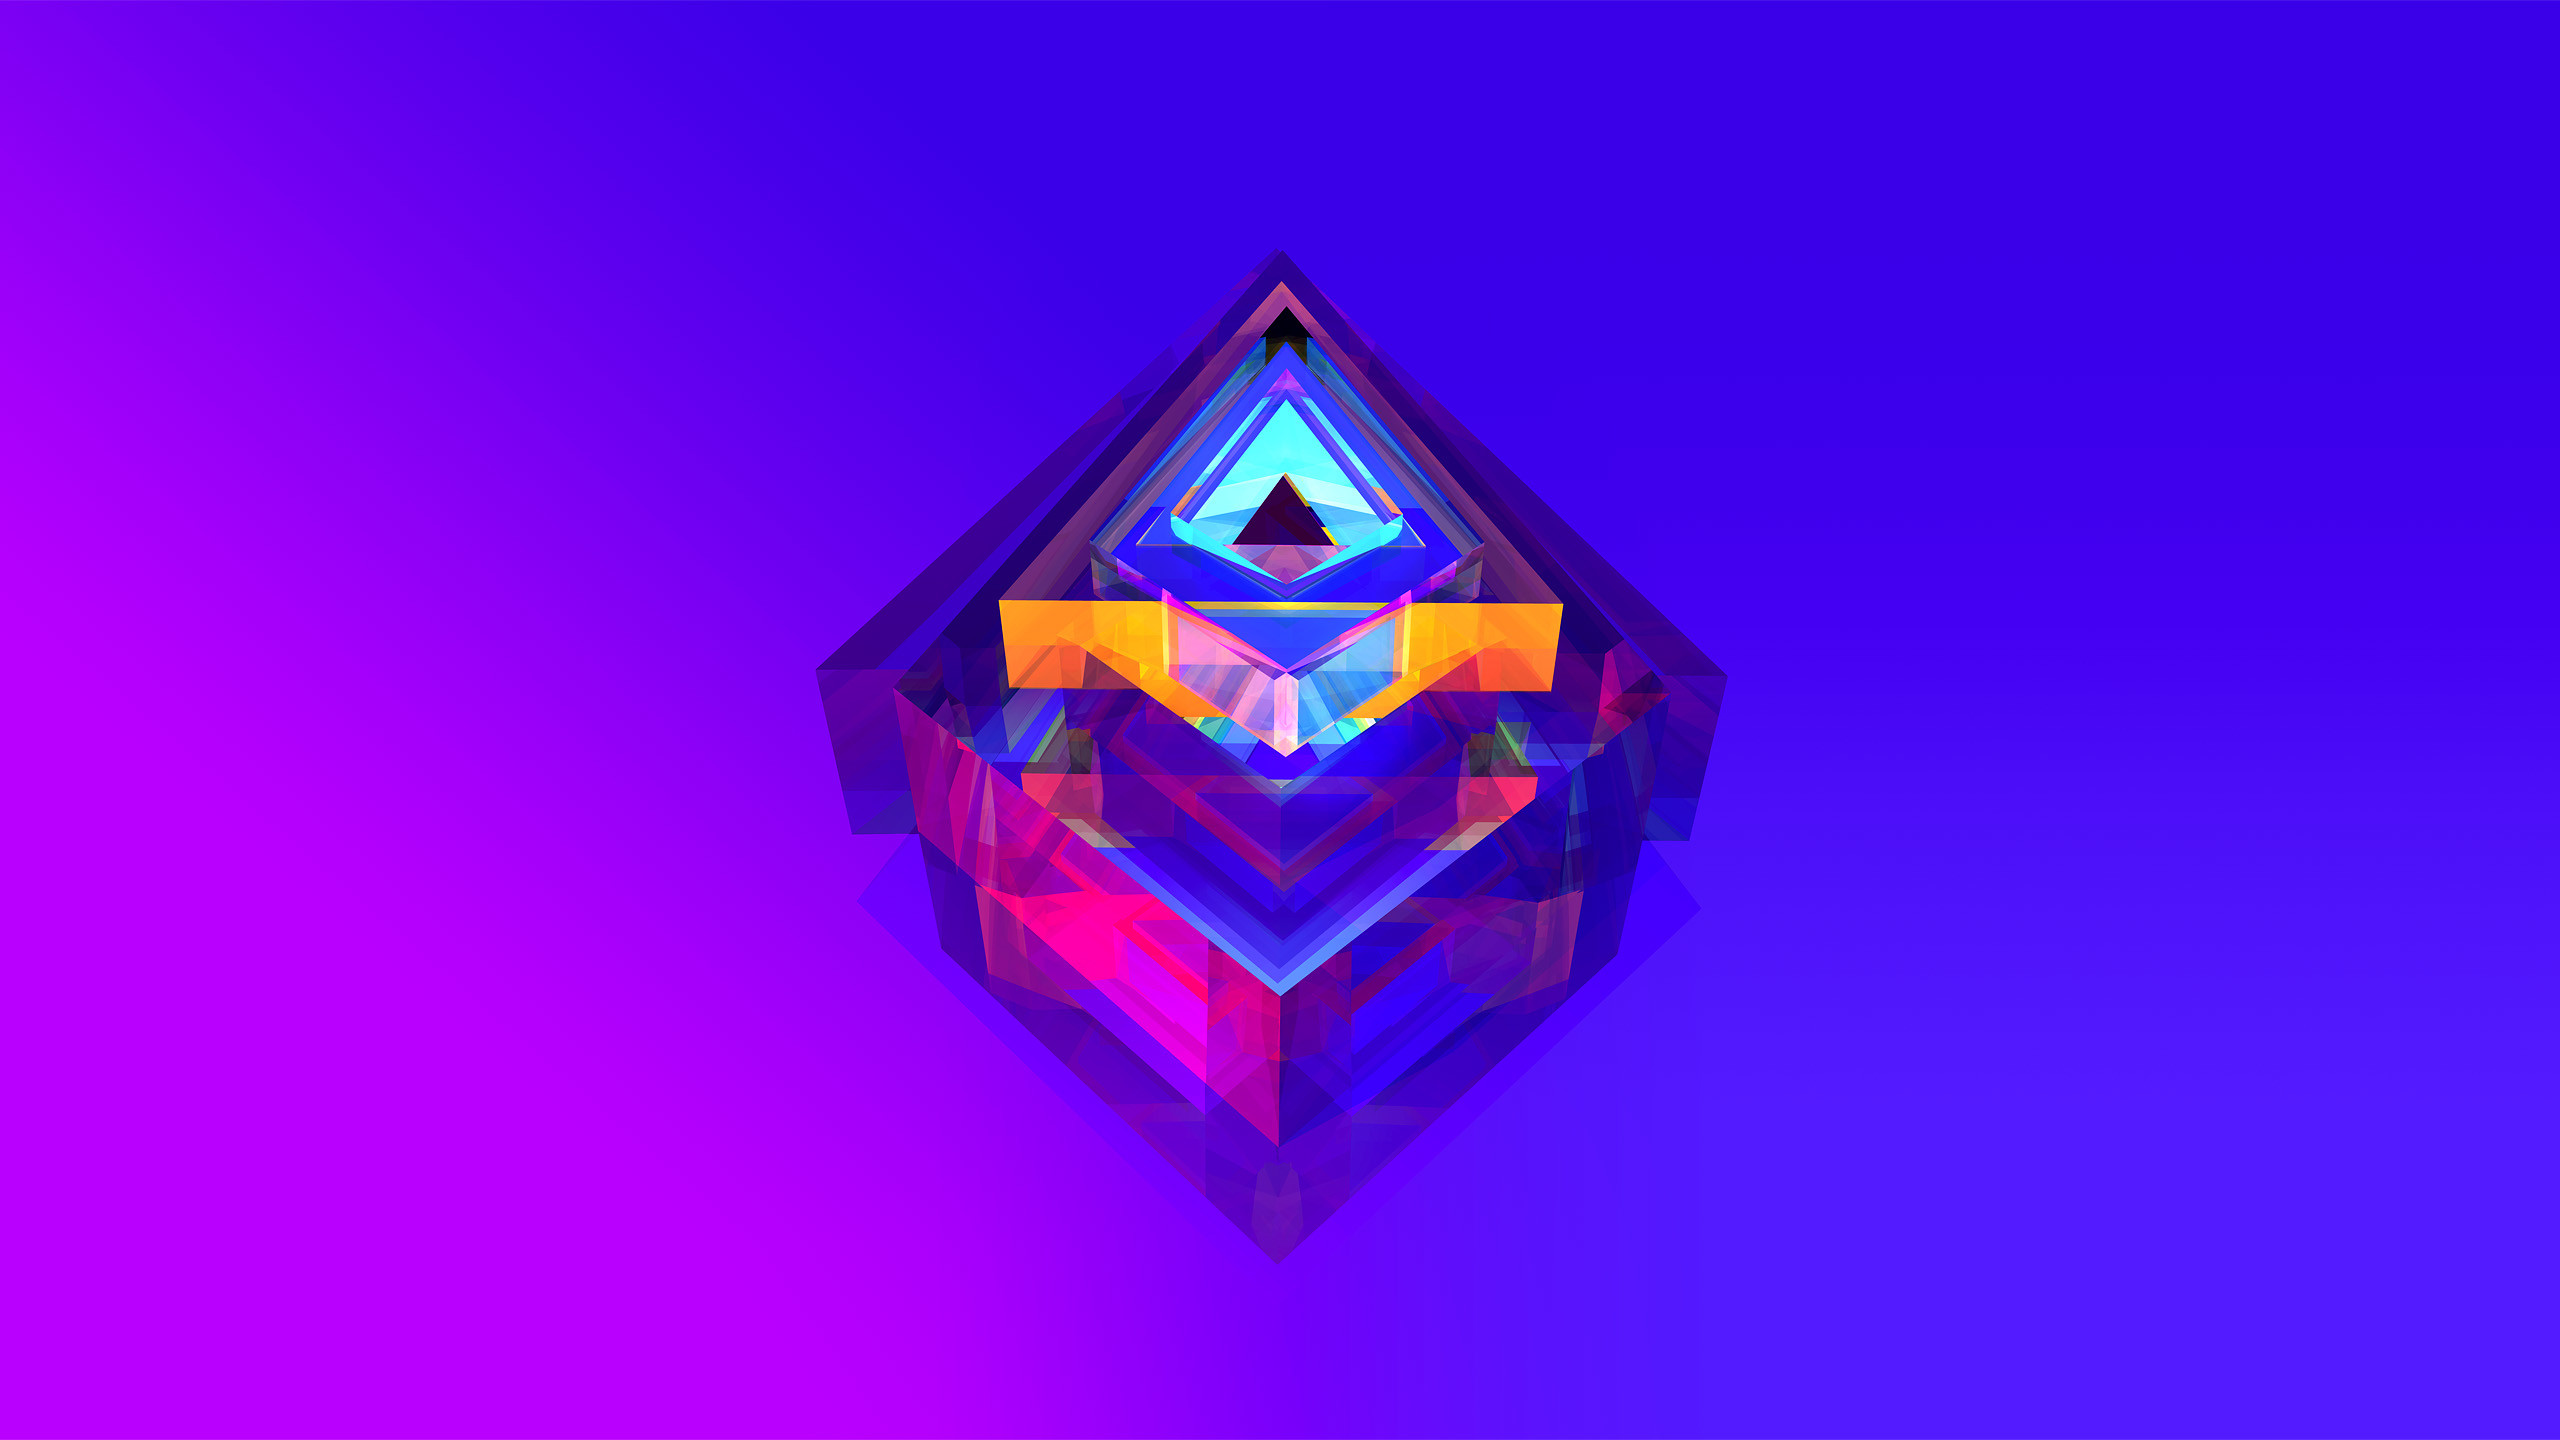 Facets by Justin Maller – Album on Imgur